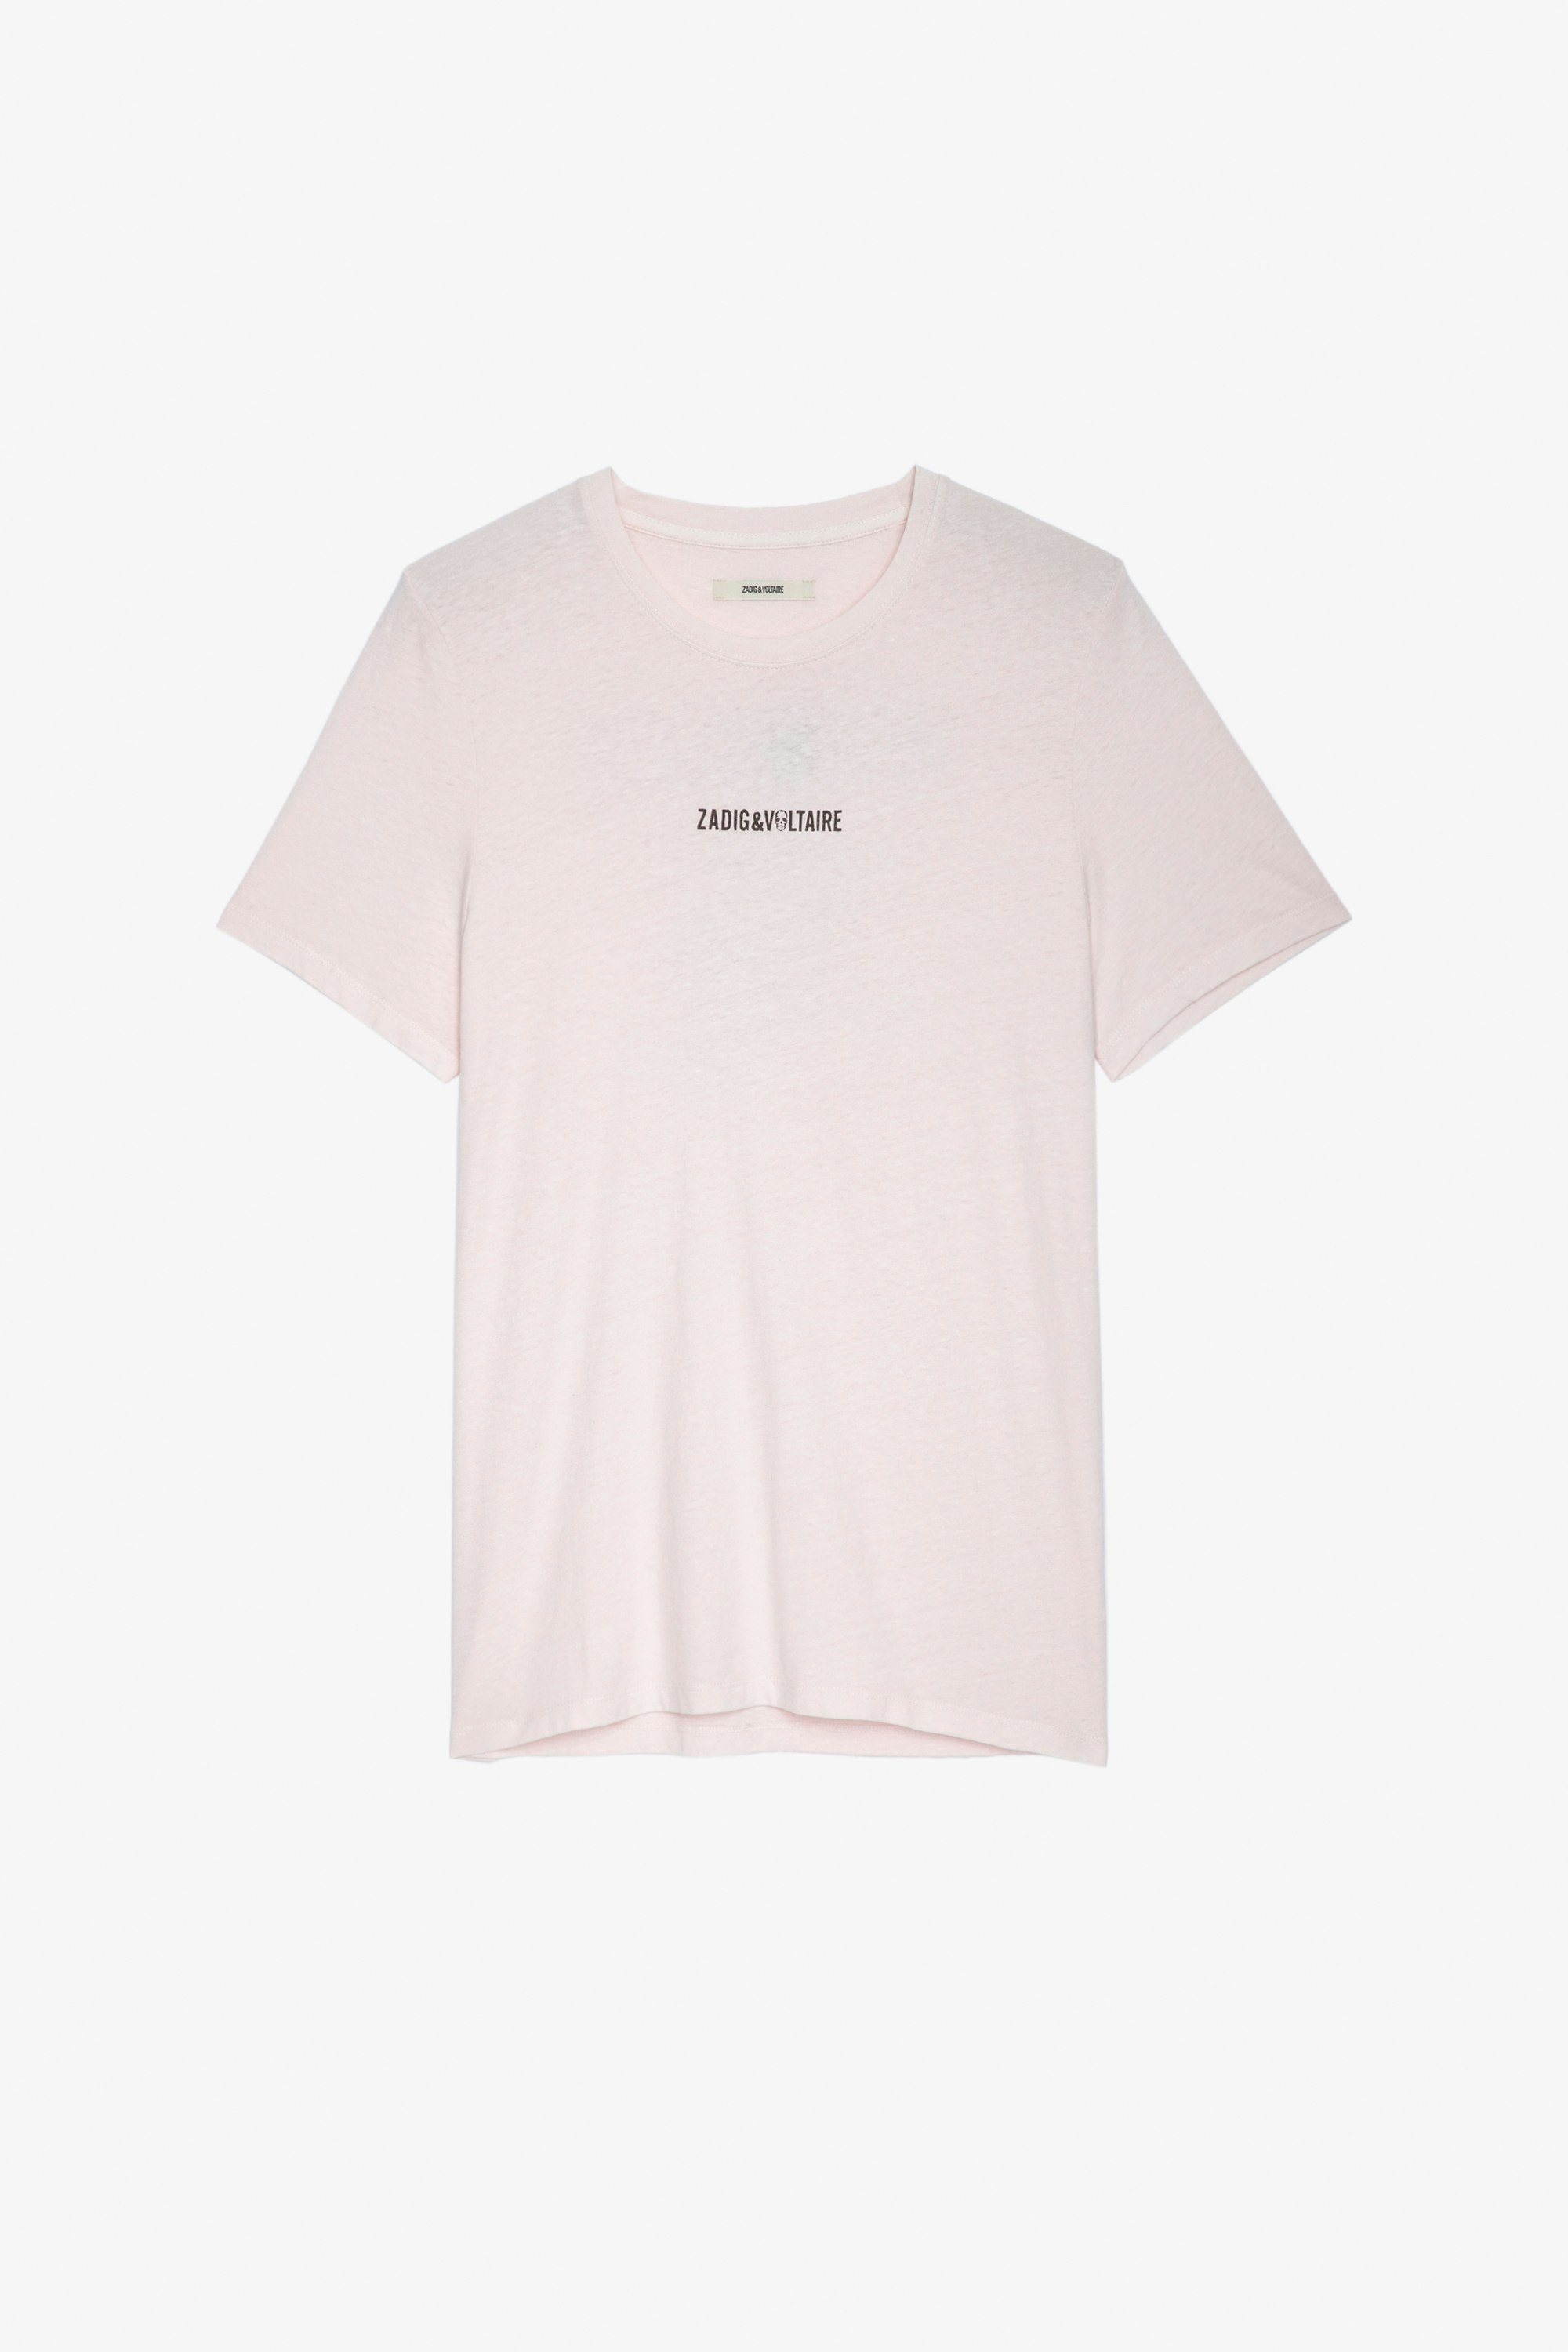 Ted T-Shirt Men’s pale pink cotton T-shirt with ZV signature on the front and “Hédoniste” slogan on the back